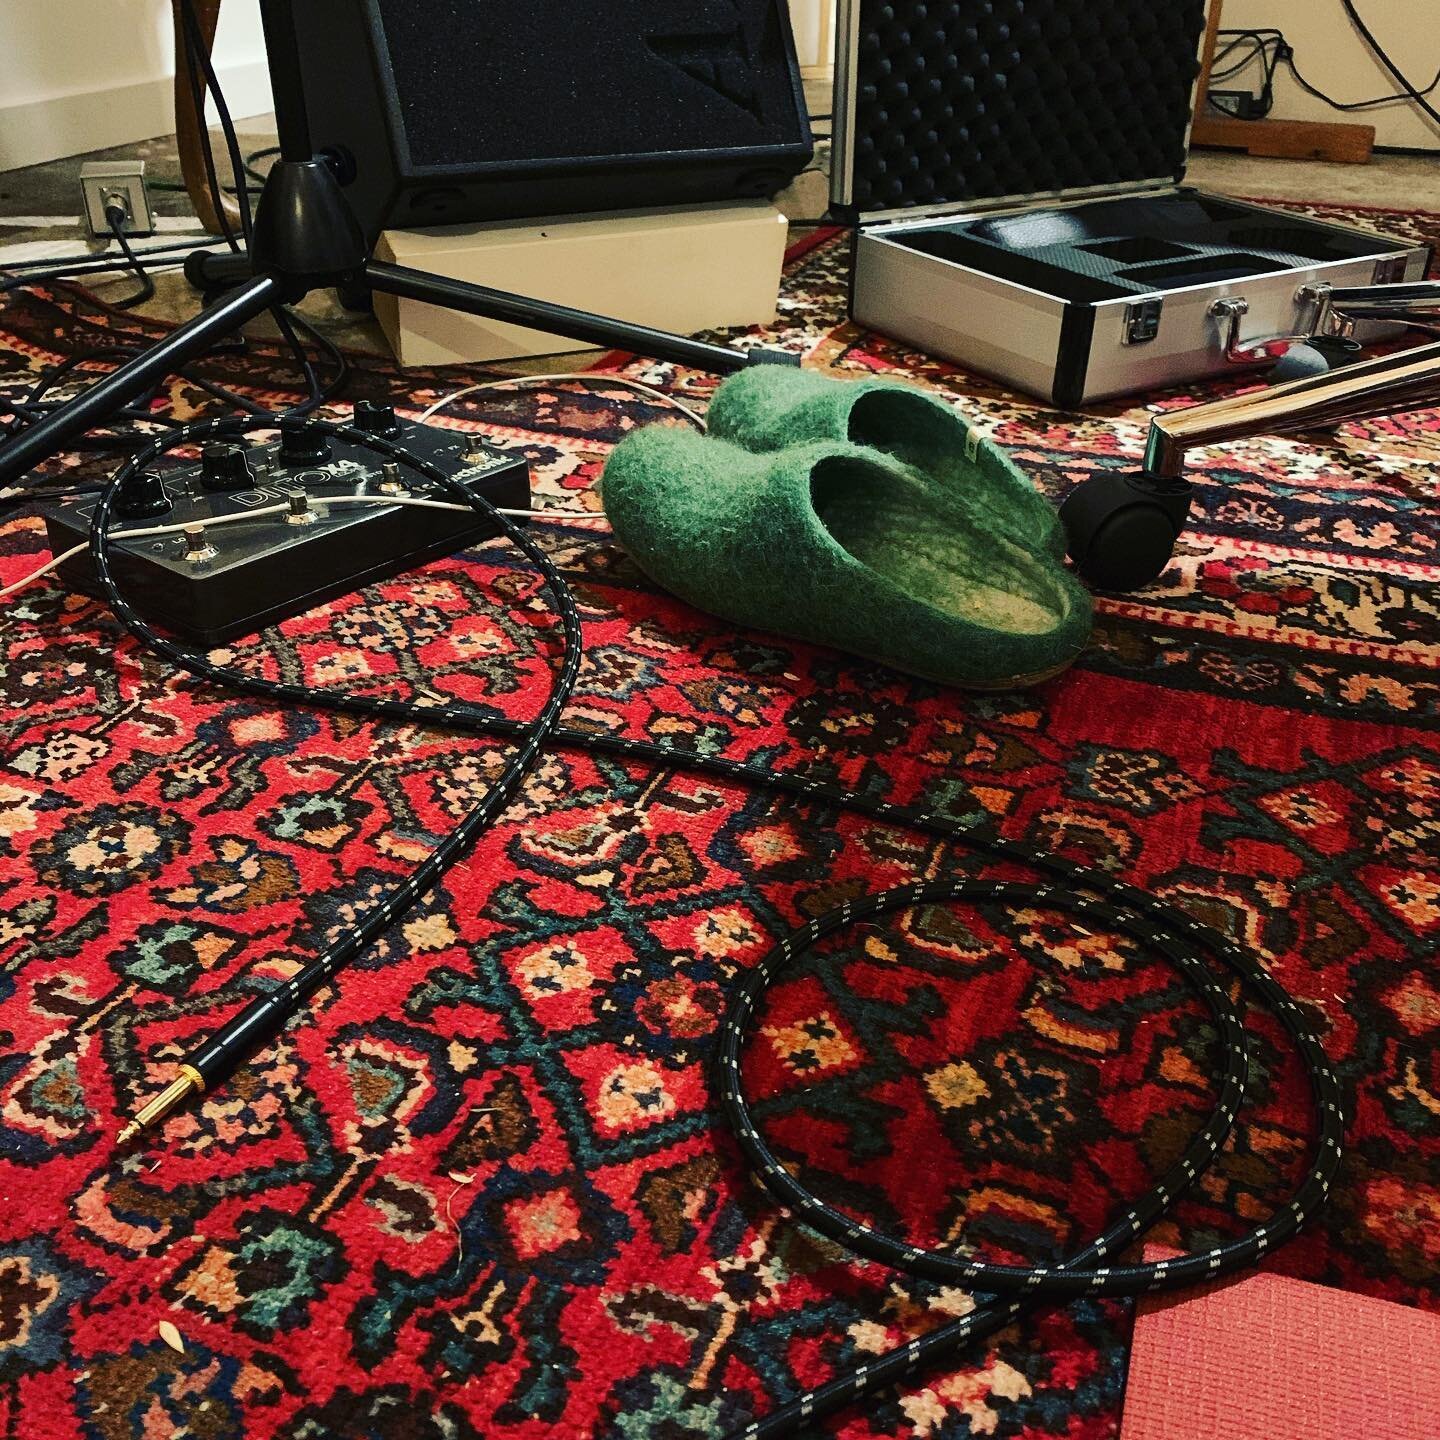 Slippers and a cable. Day 6/100 #100daysofpractice #cello @aeramps @tcelectronic